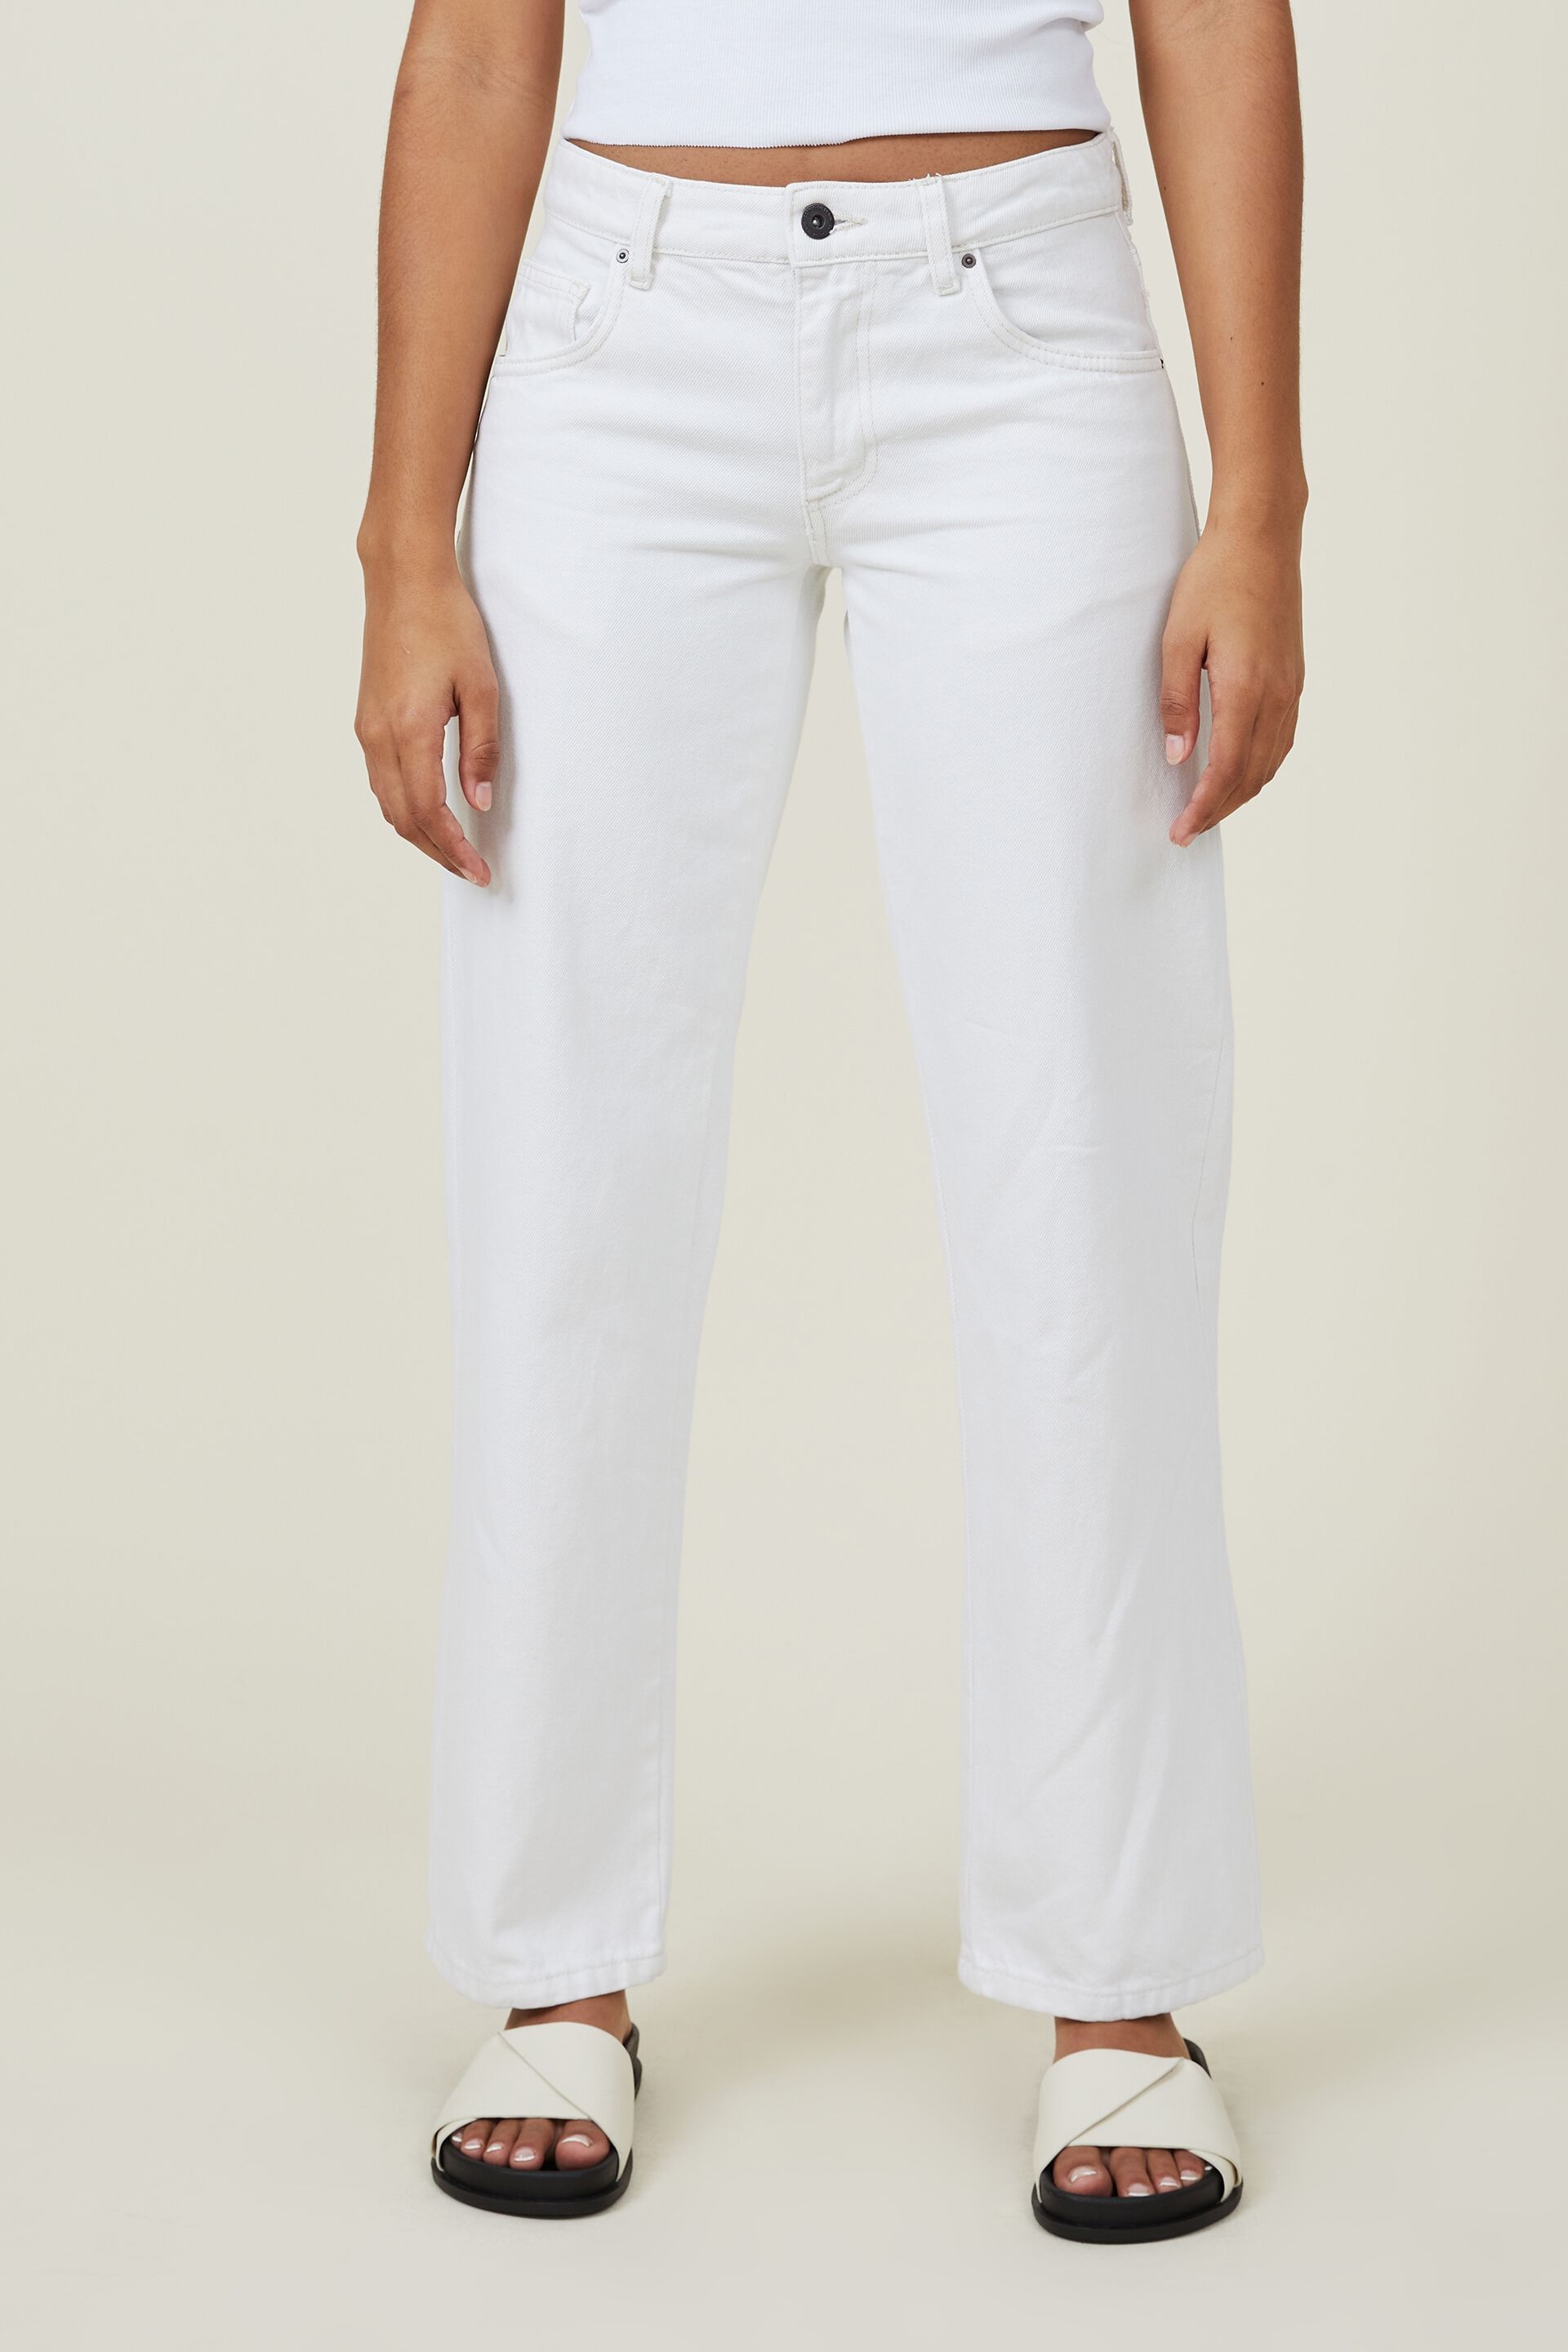 Best white jeans and shorts for women: review of 16 styles